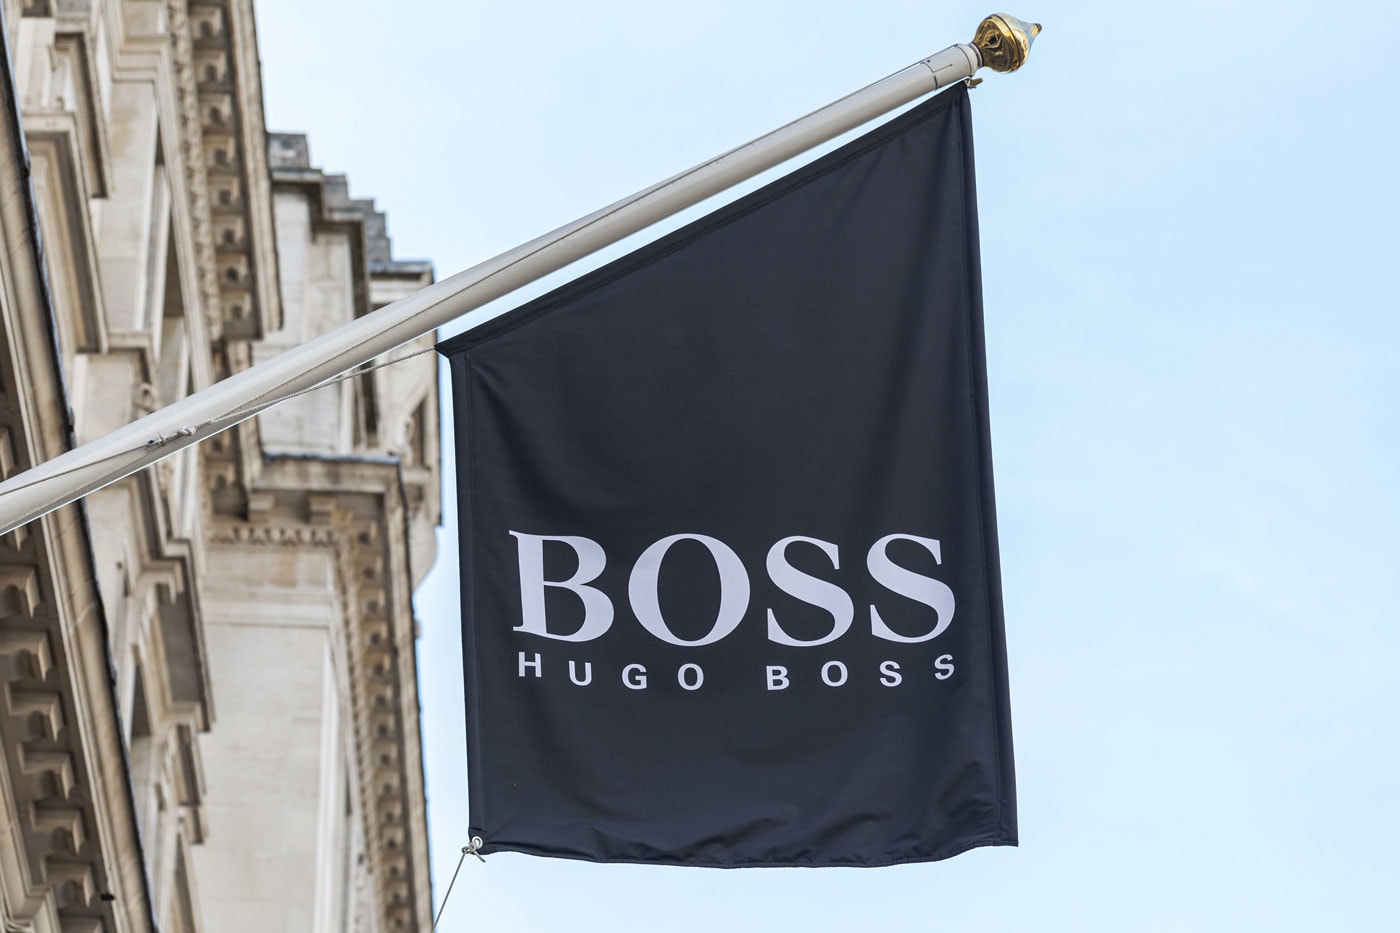 Hugo Boss kanine pets world limited apparel accessories home products toys full-fledged dog collection fall winter 2022 news